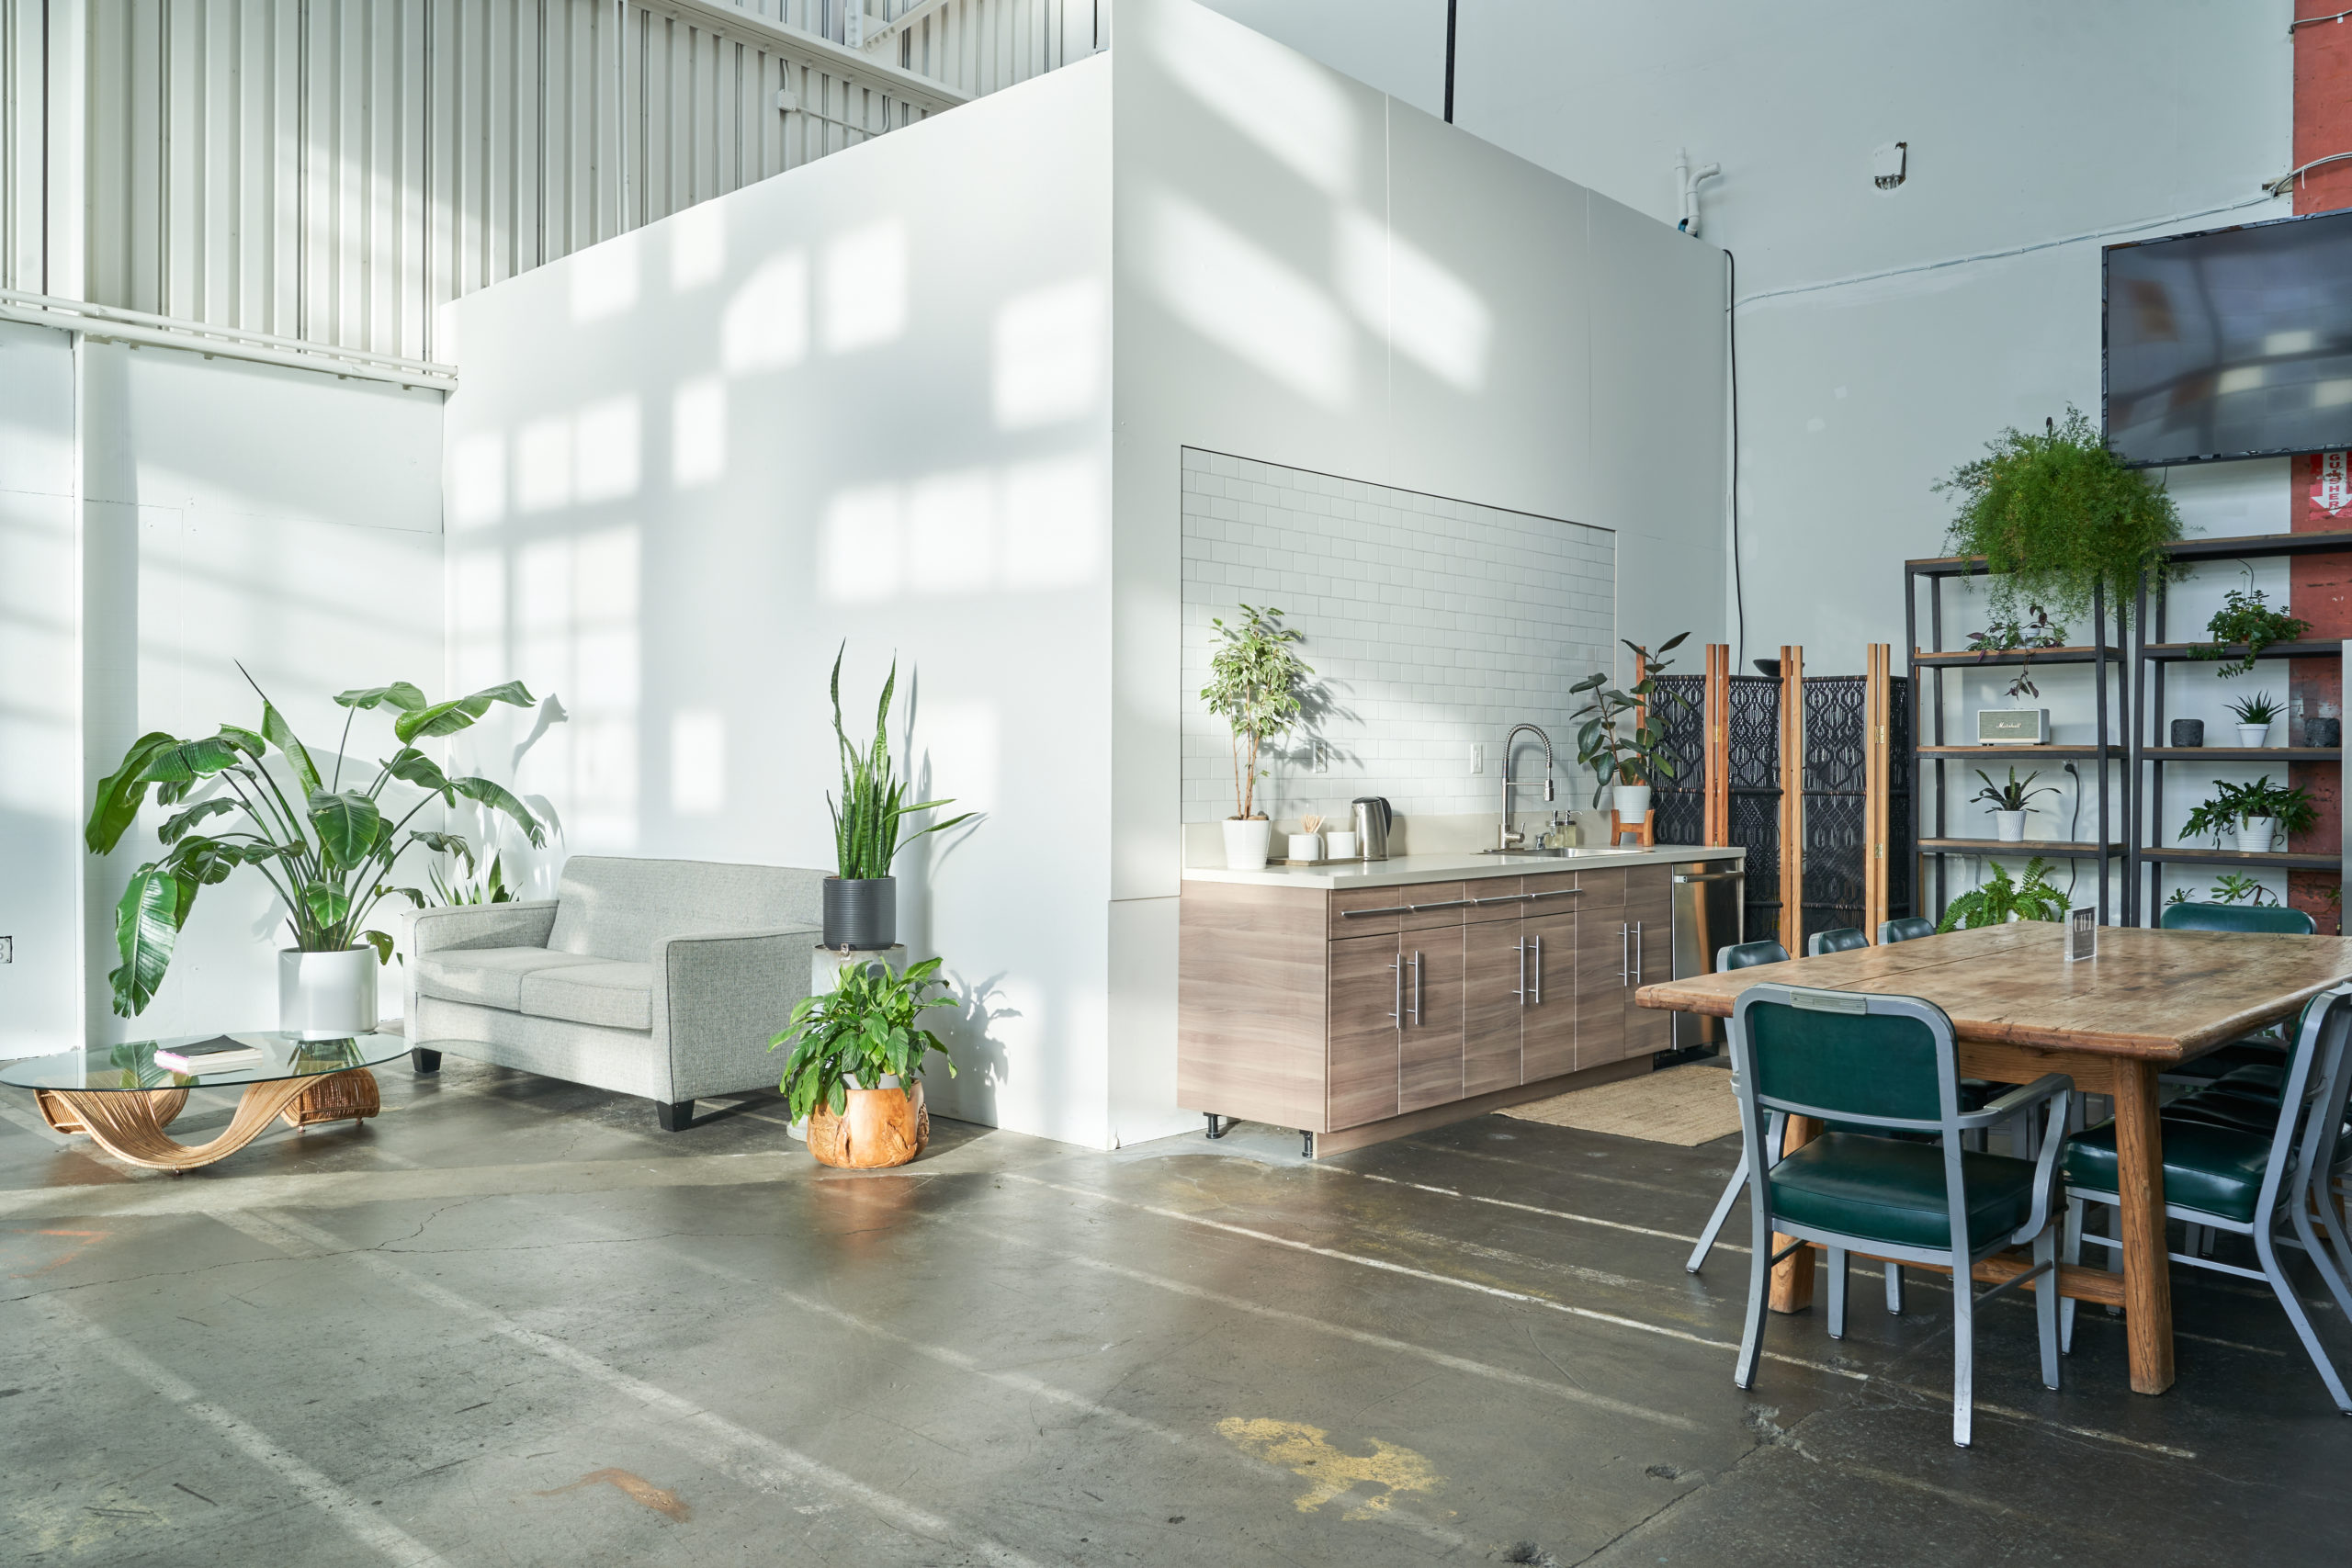 This creative studio space for rent has a small gray sofa surrounded by green potted plants. It also features a little kitchen area as well as a large wooden table surrounded by green chairs. There's even shelves full of plants and a TV on the wall.